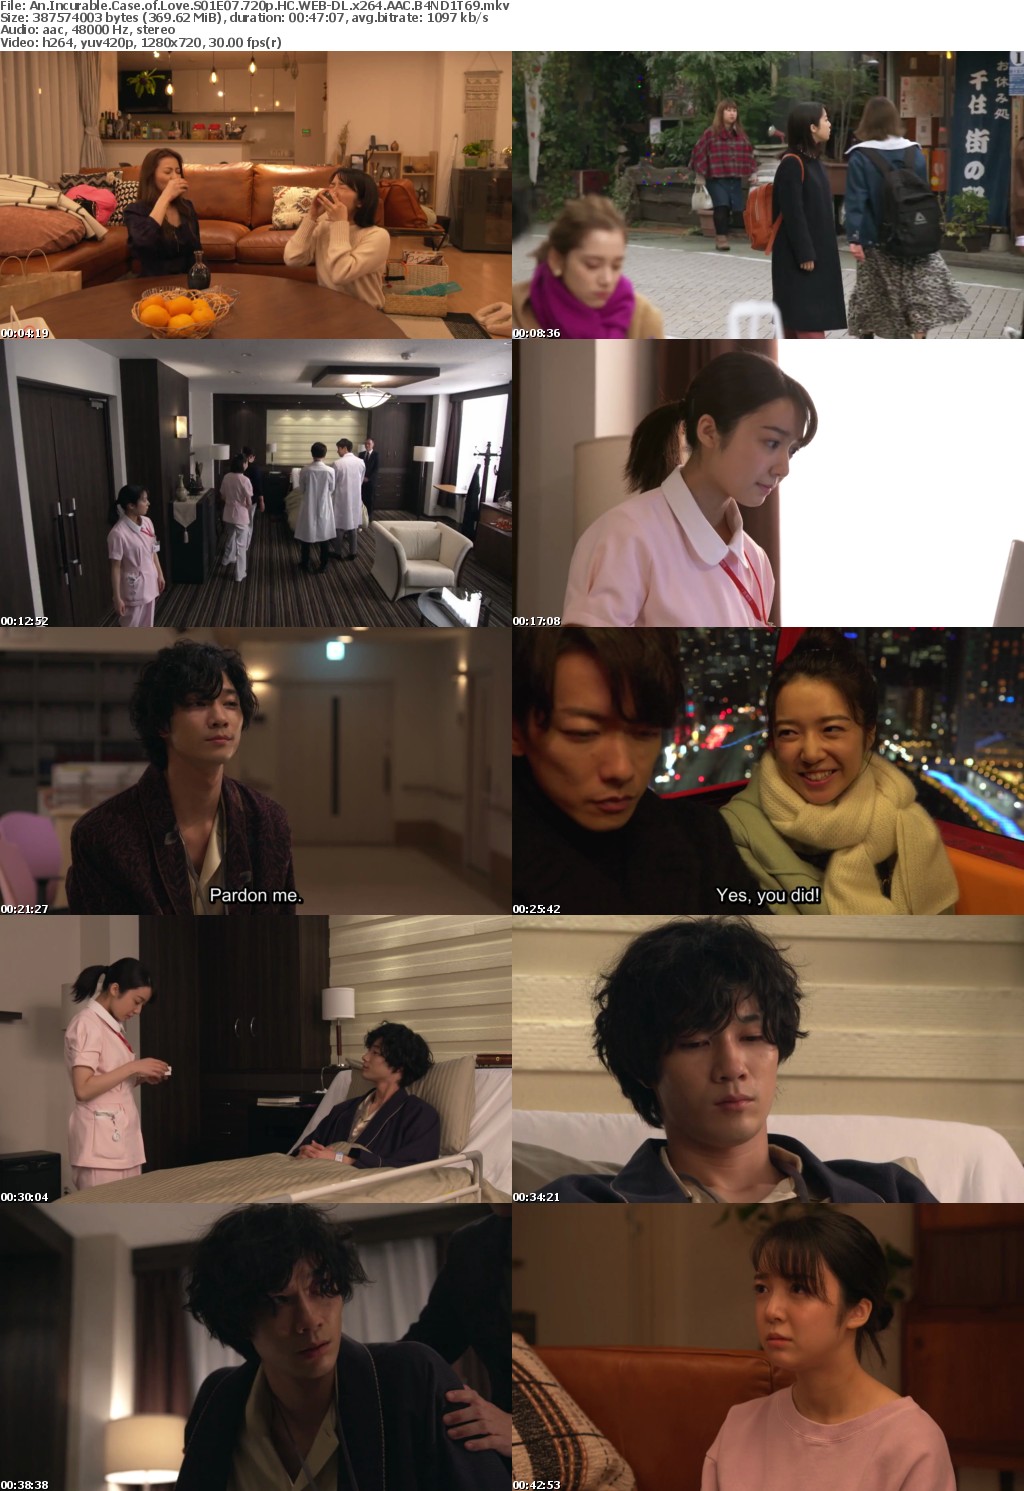 An Incurable Case of Love S01 COMPLETE 720p HC WEB-DL x264 AAC B4ND1T69